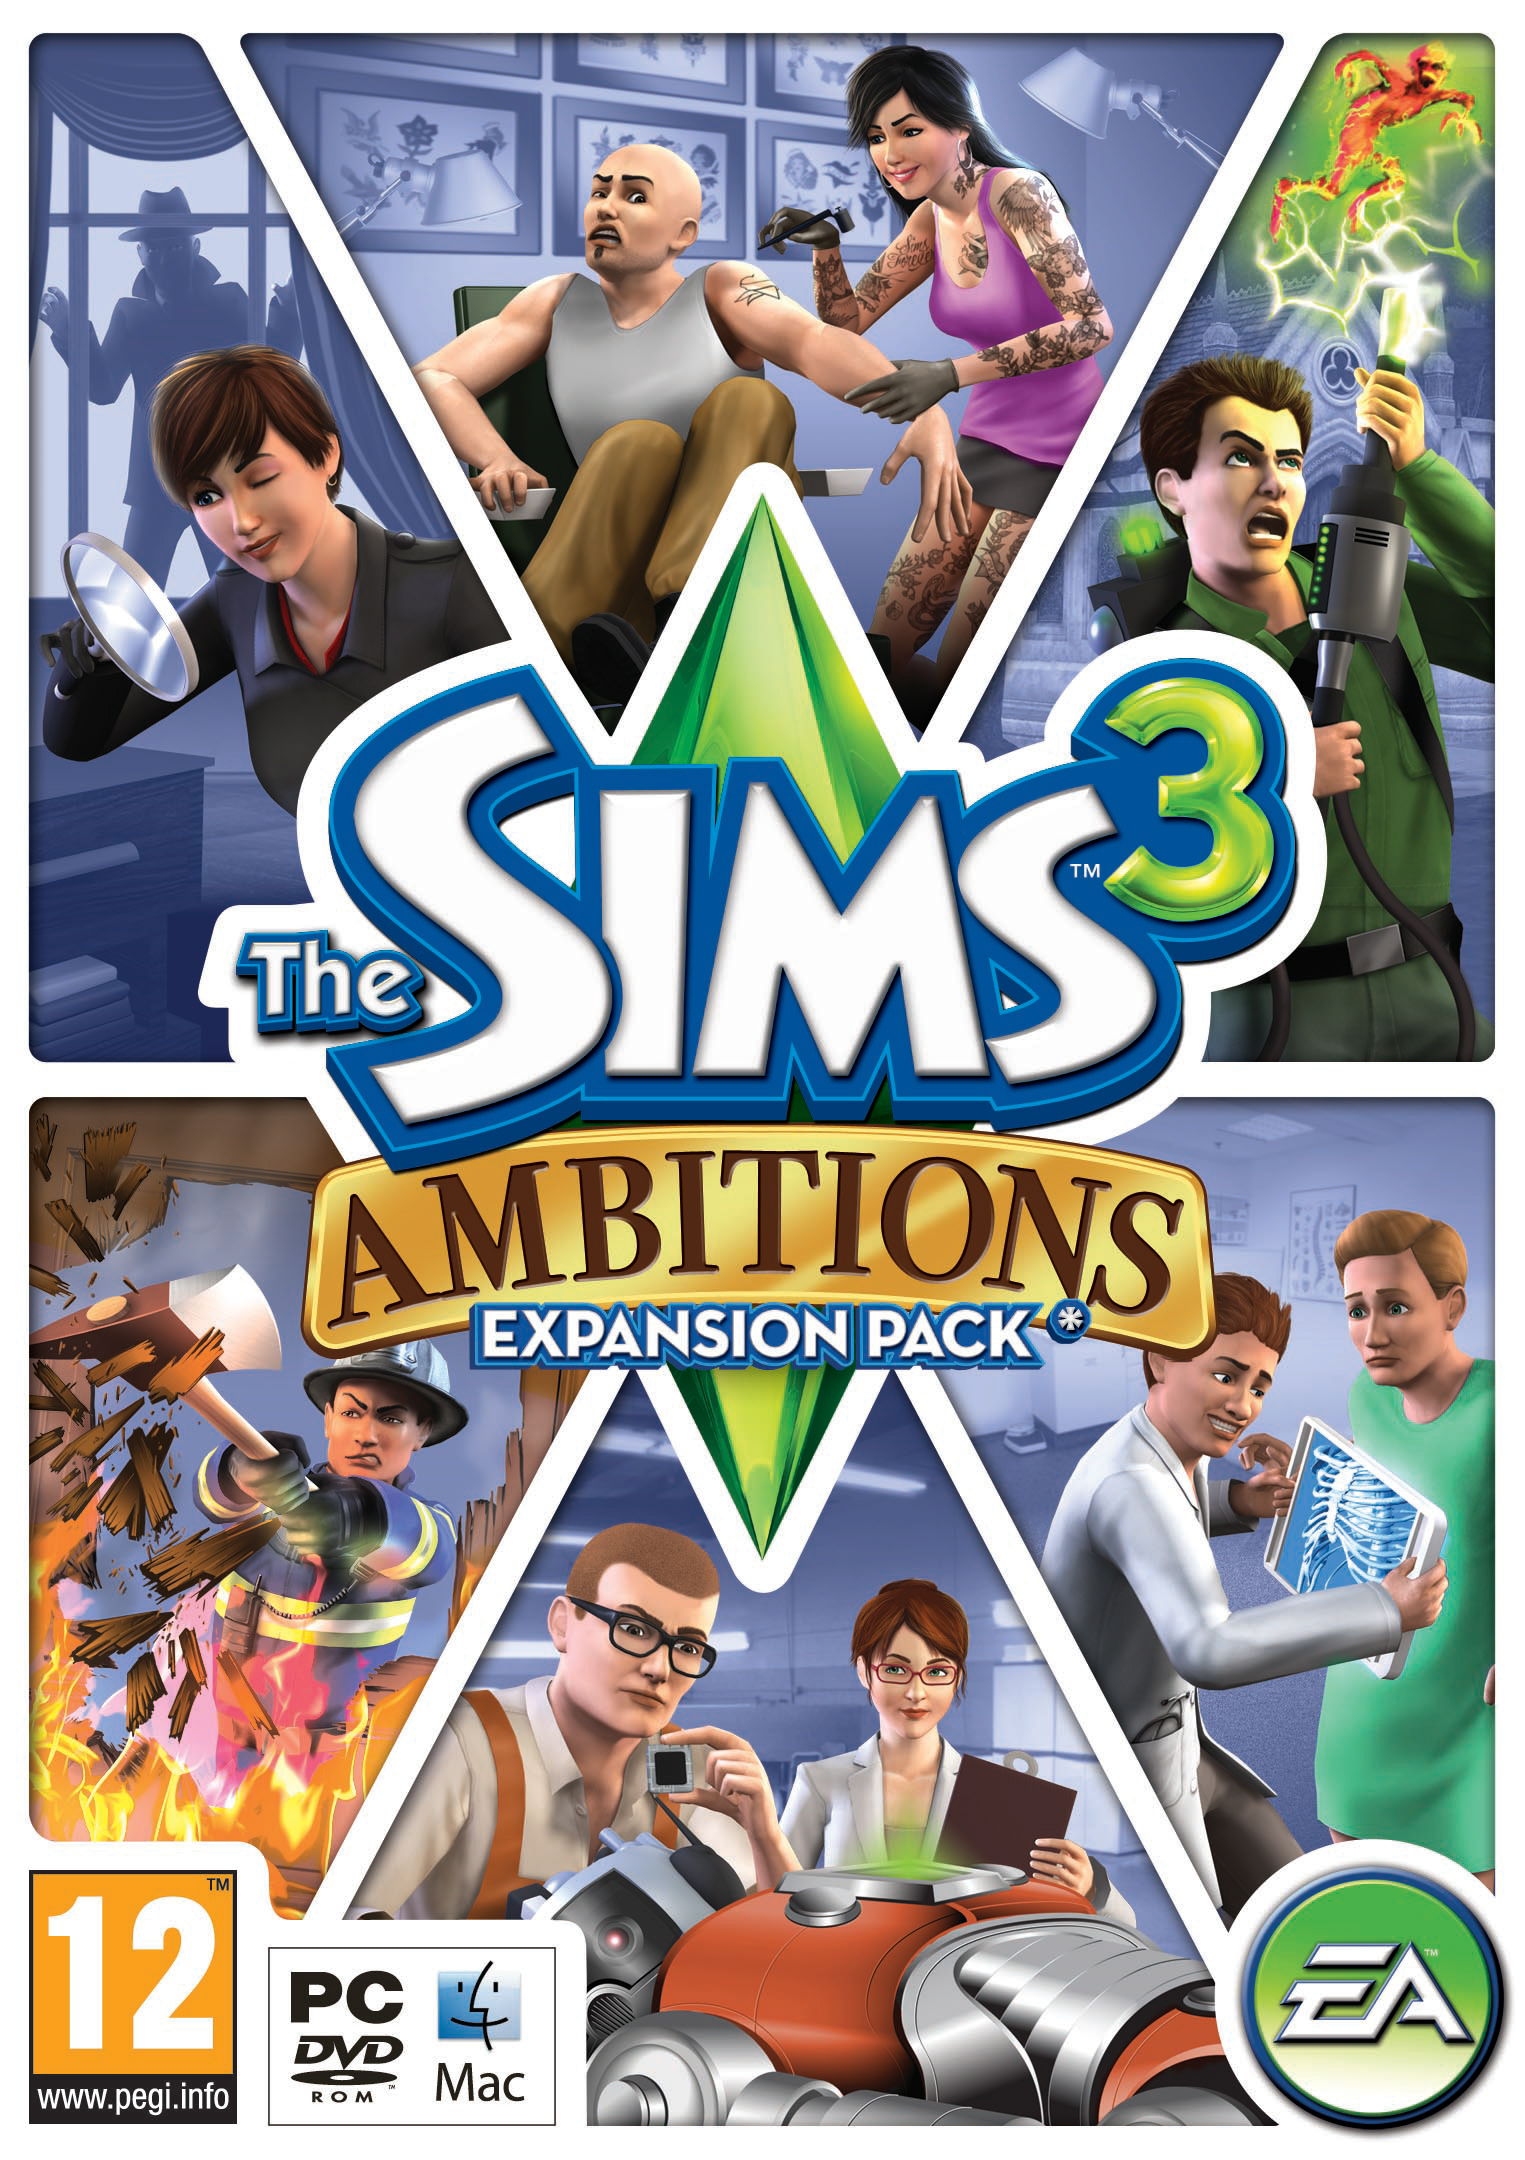 Game guide:The Sims 3 | The Sims Wiki | FANDOM powered by Wikia